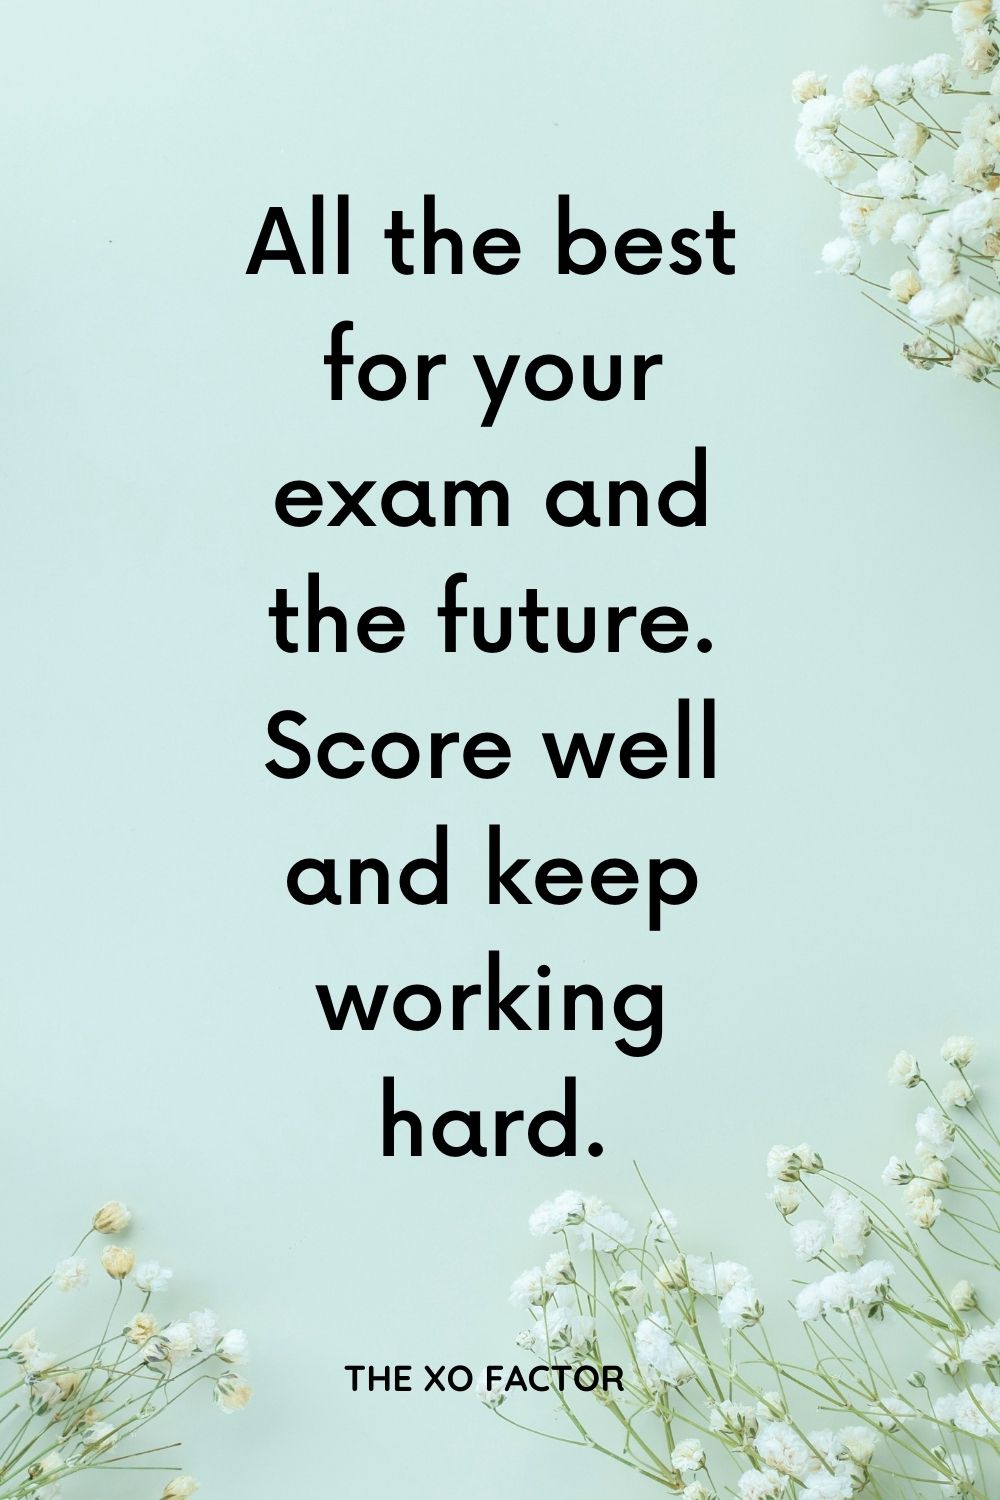 All the best for your exam and the future. Score well and keep working hard.